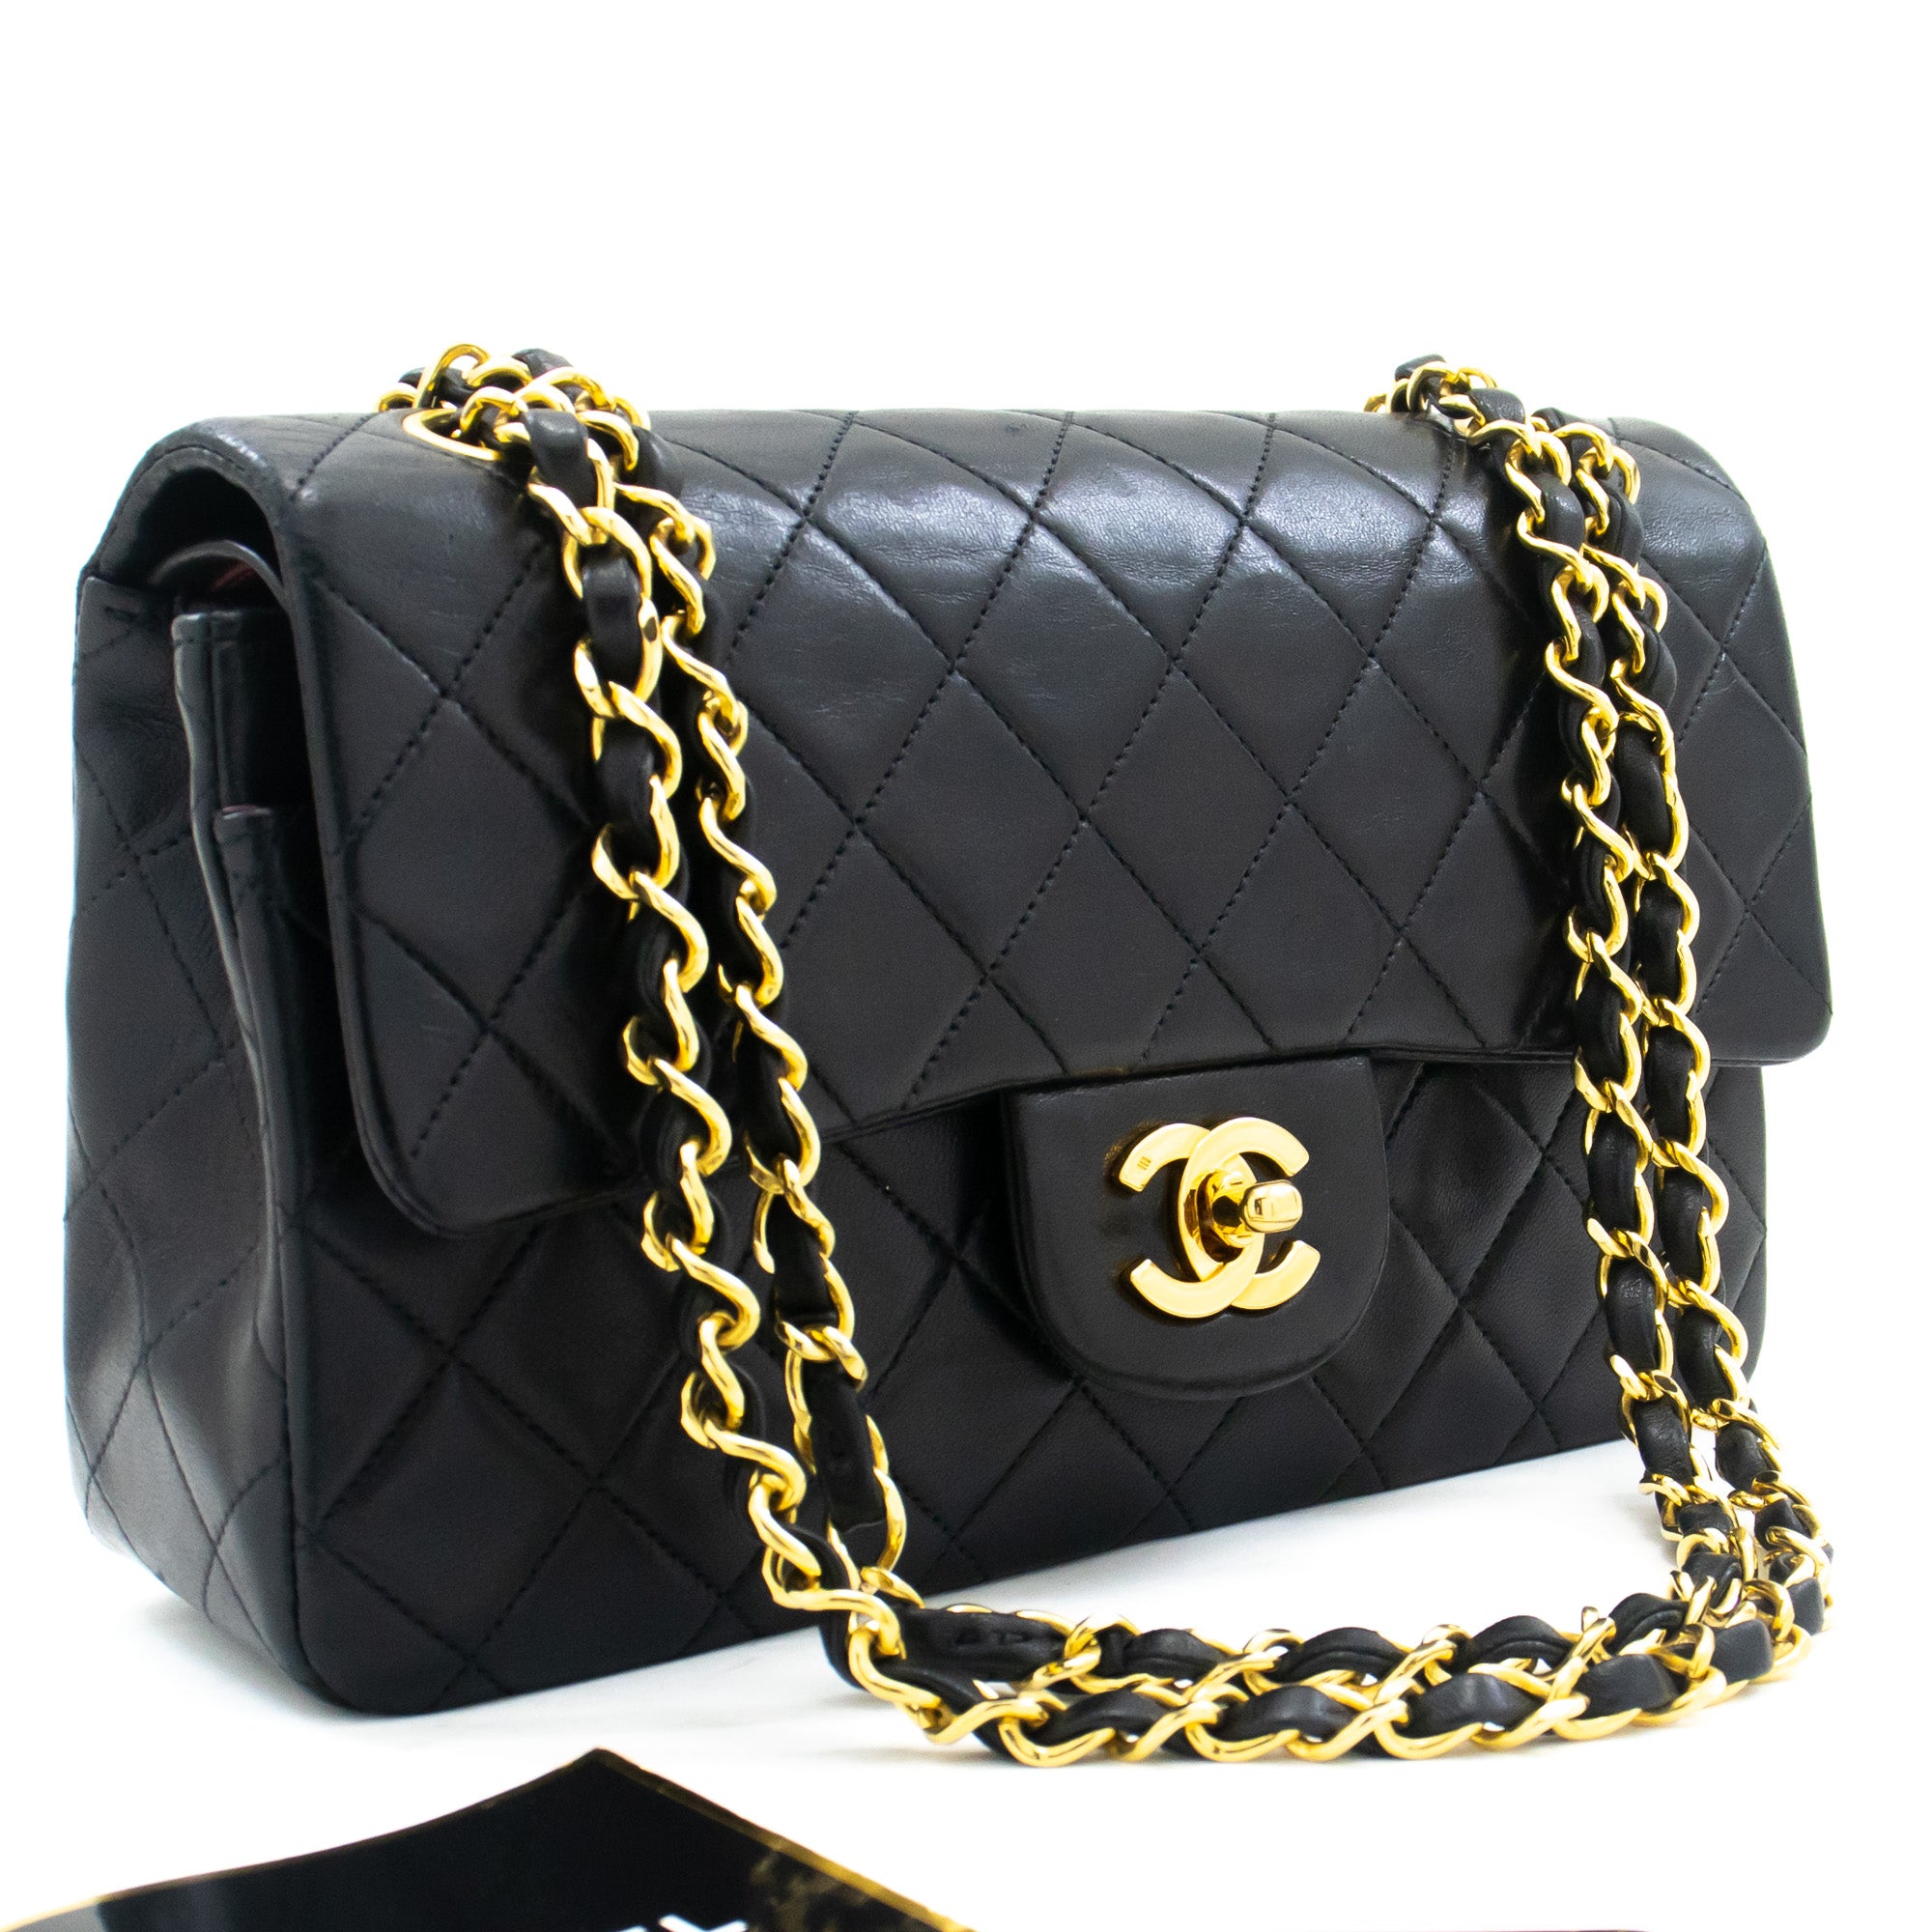 Sold at Auction: CHANEL BICOLOR BLACK/RED LAMBSKIN QUILTED HANDBAG